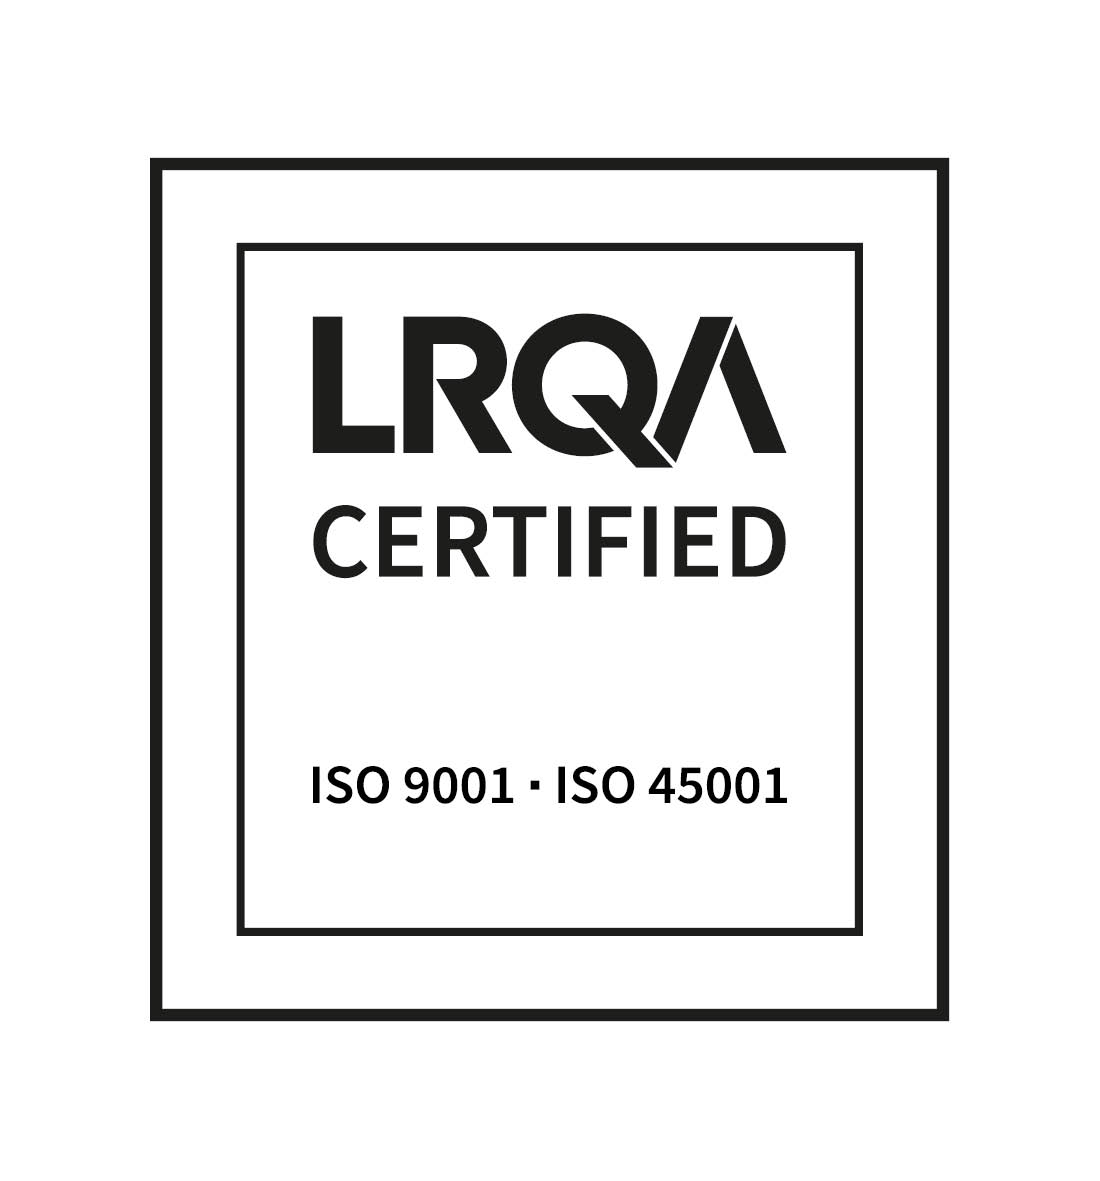 LRQA Certified ISO Standards